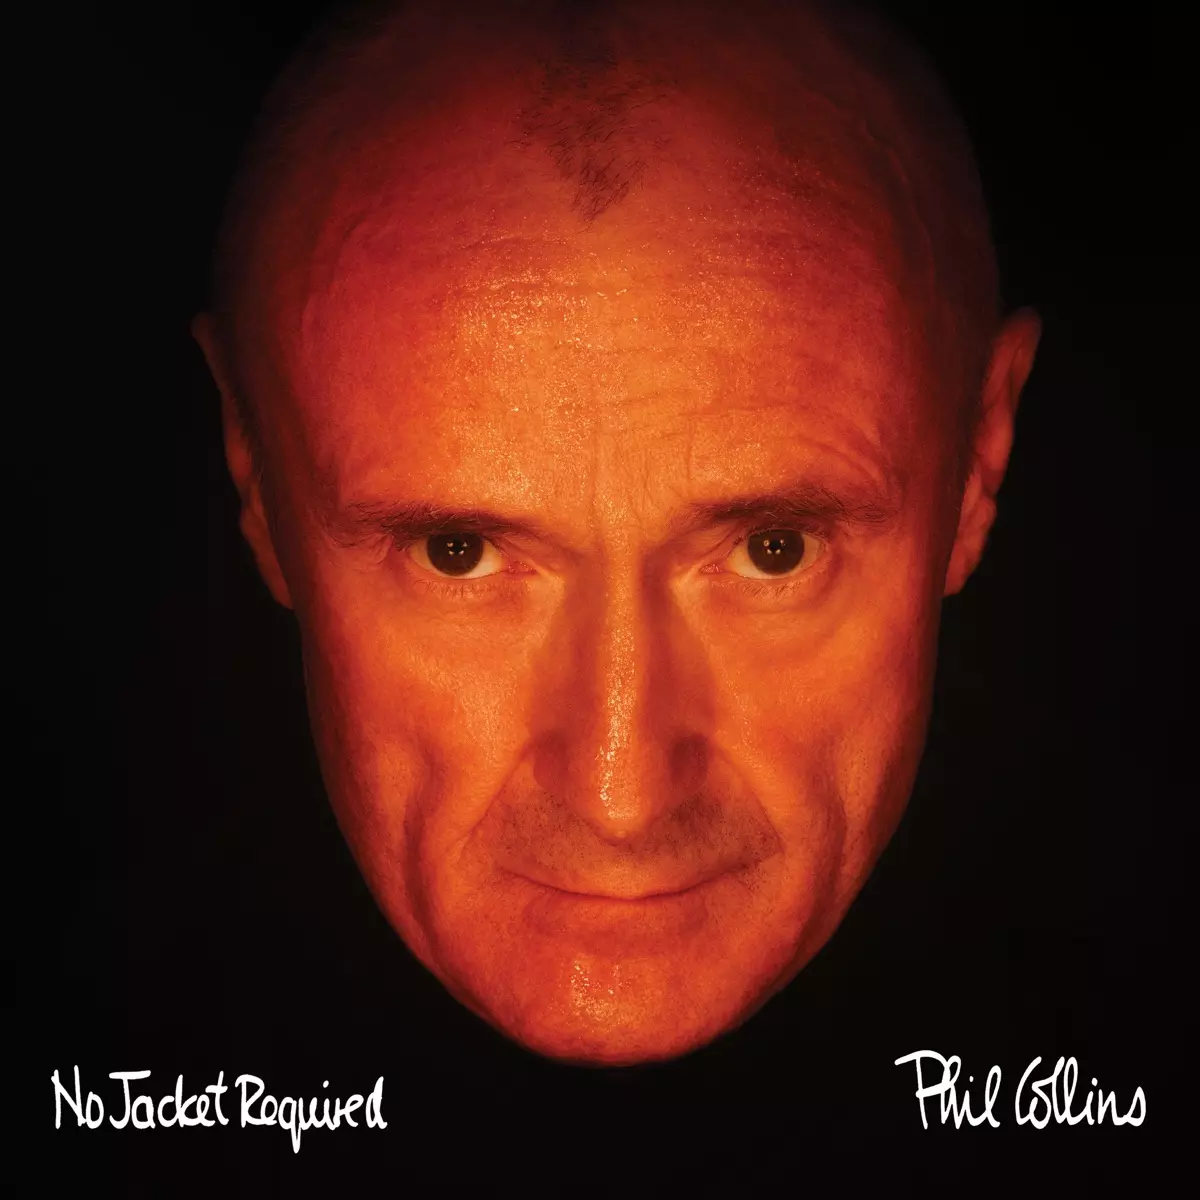 No Jacket Required (Remastered) by Phil Collins on Apple Music